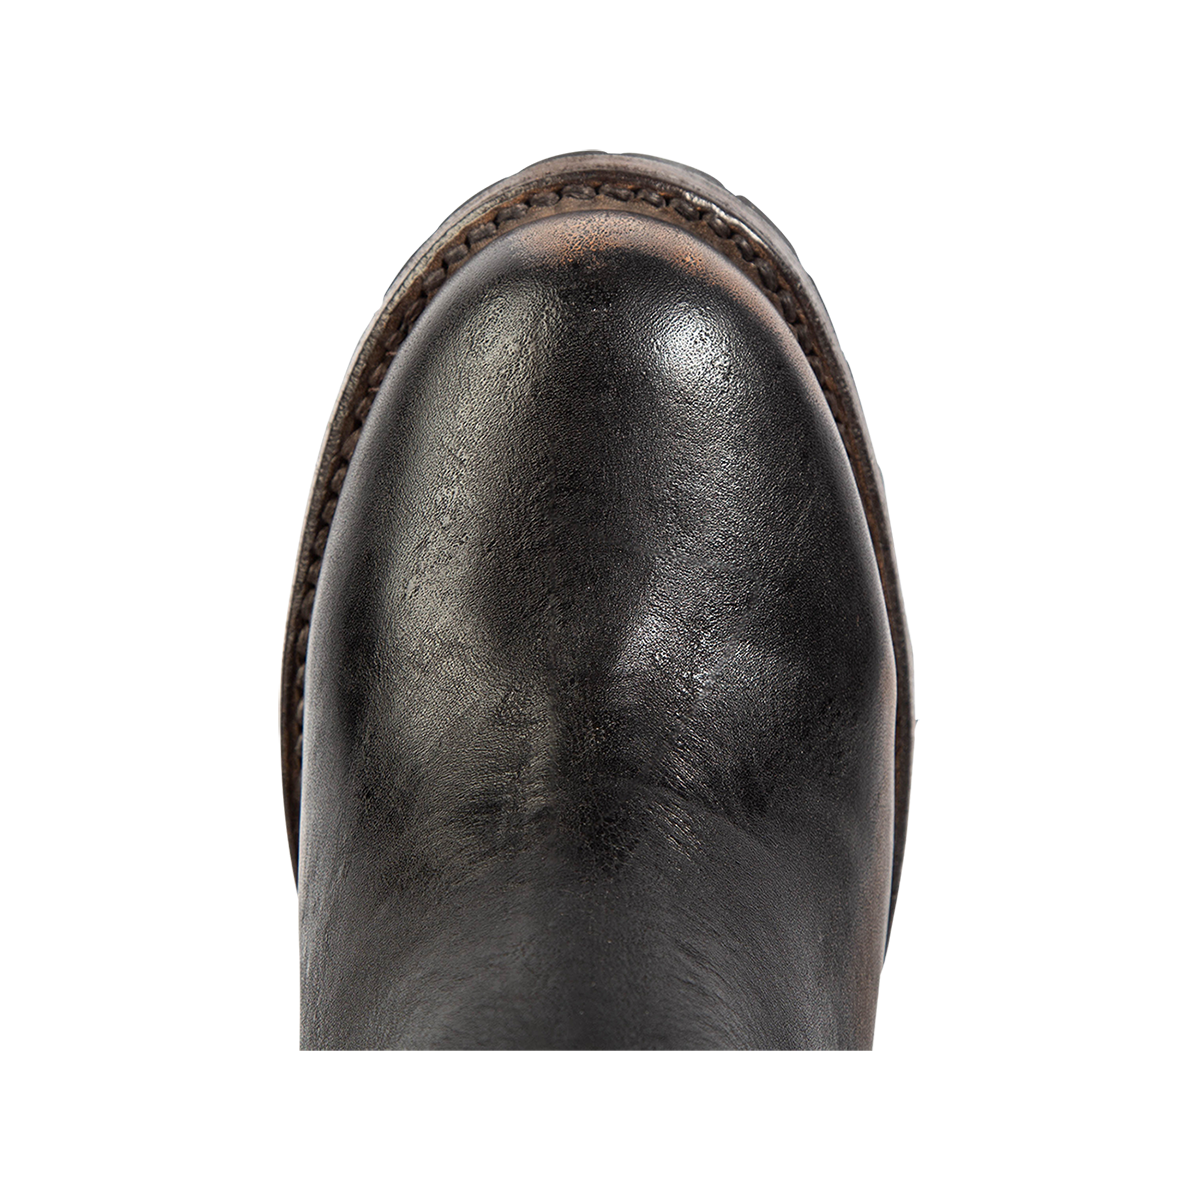 Top view showing a rounded toe and 100% full grain leather on FREEBIRD women's Neverland black leather bootie